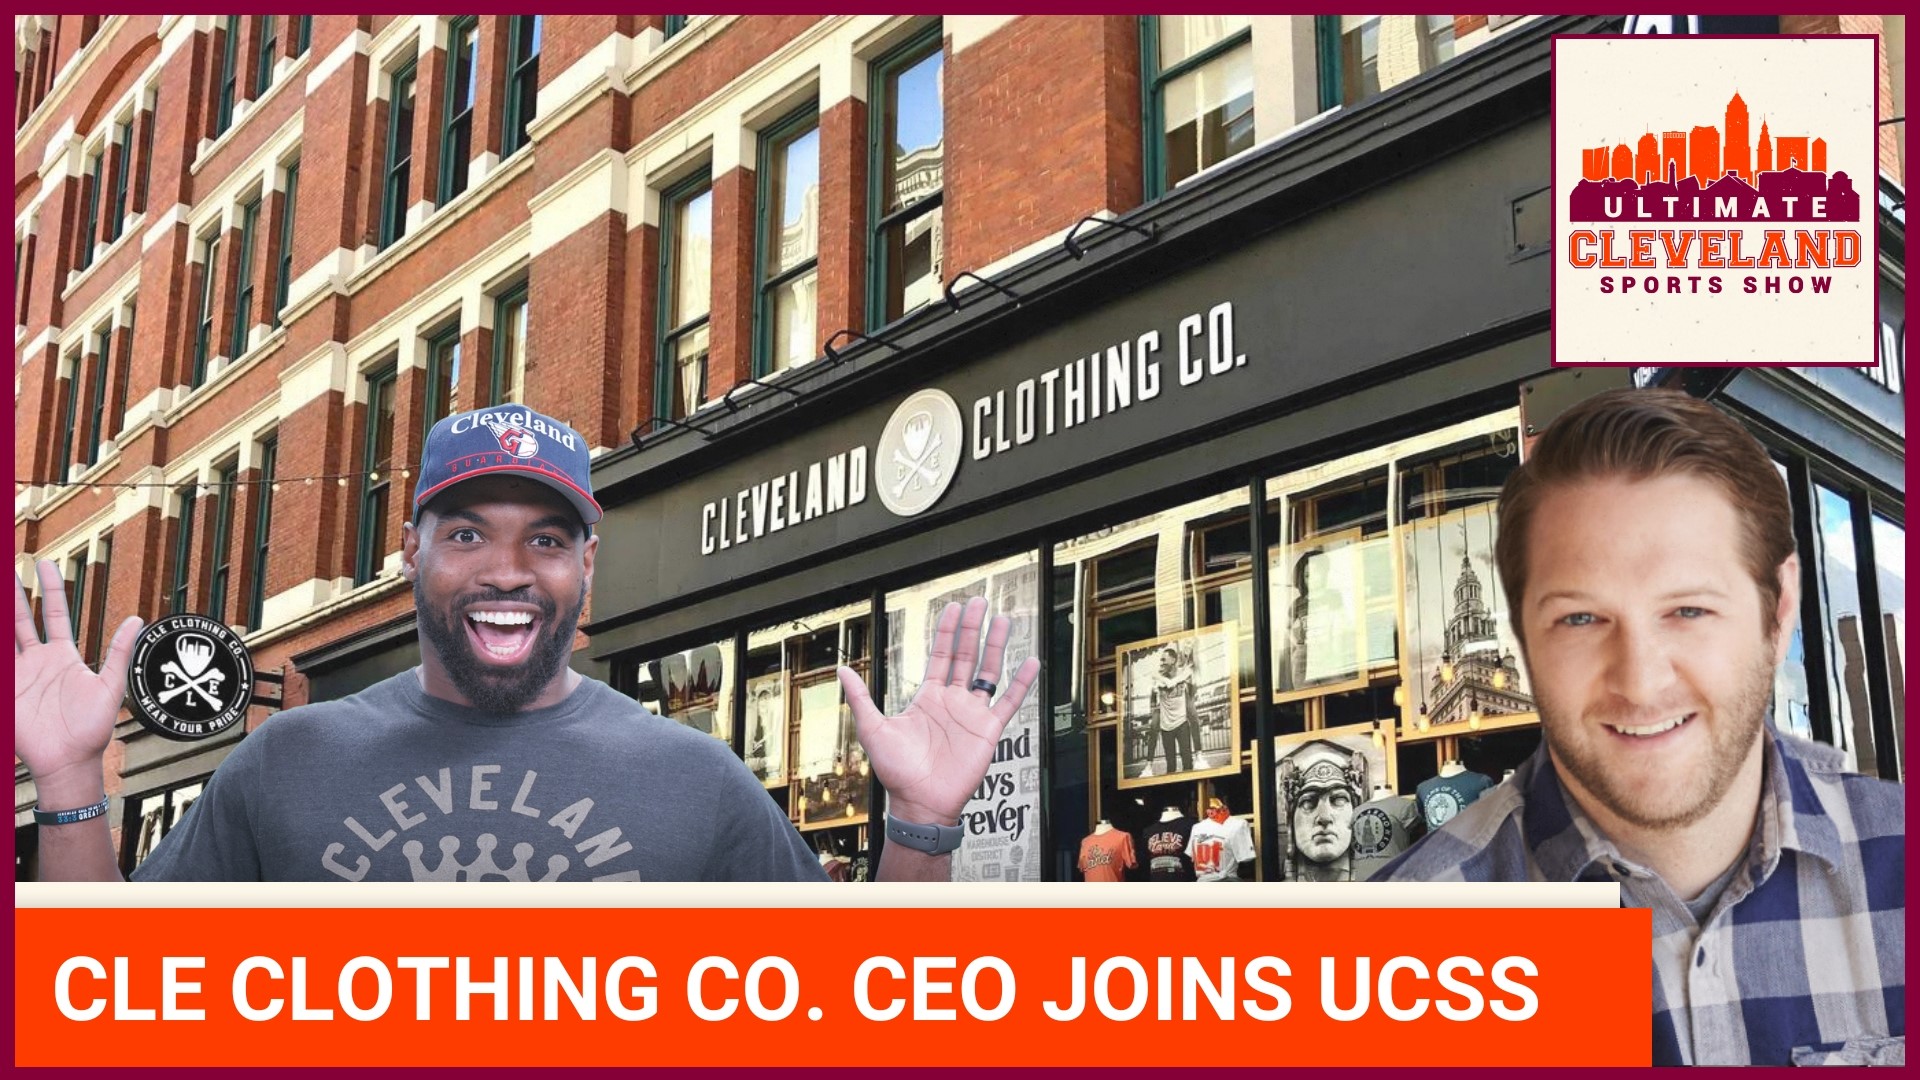 Click here to shop Cleveland Clothing Company and buy a UCSS T-shirt: https://cleclothingco.com/collections/ultimate-cleveland-sports-show